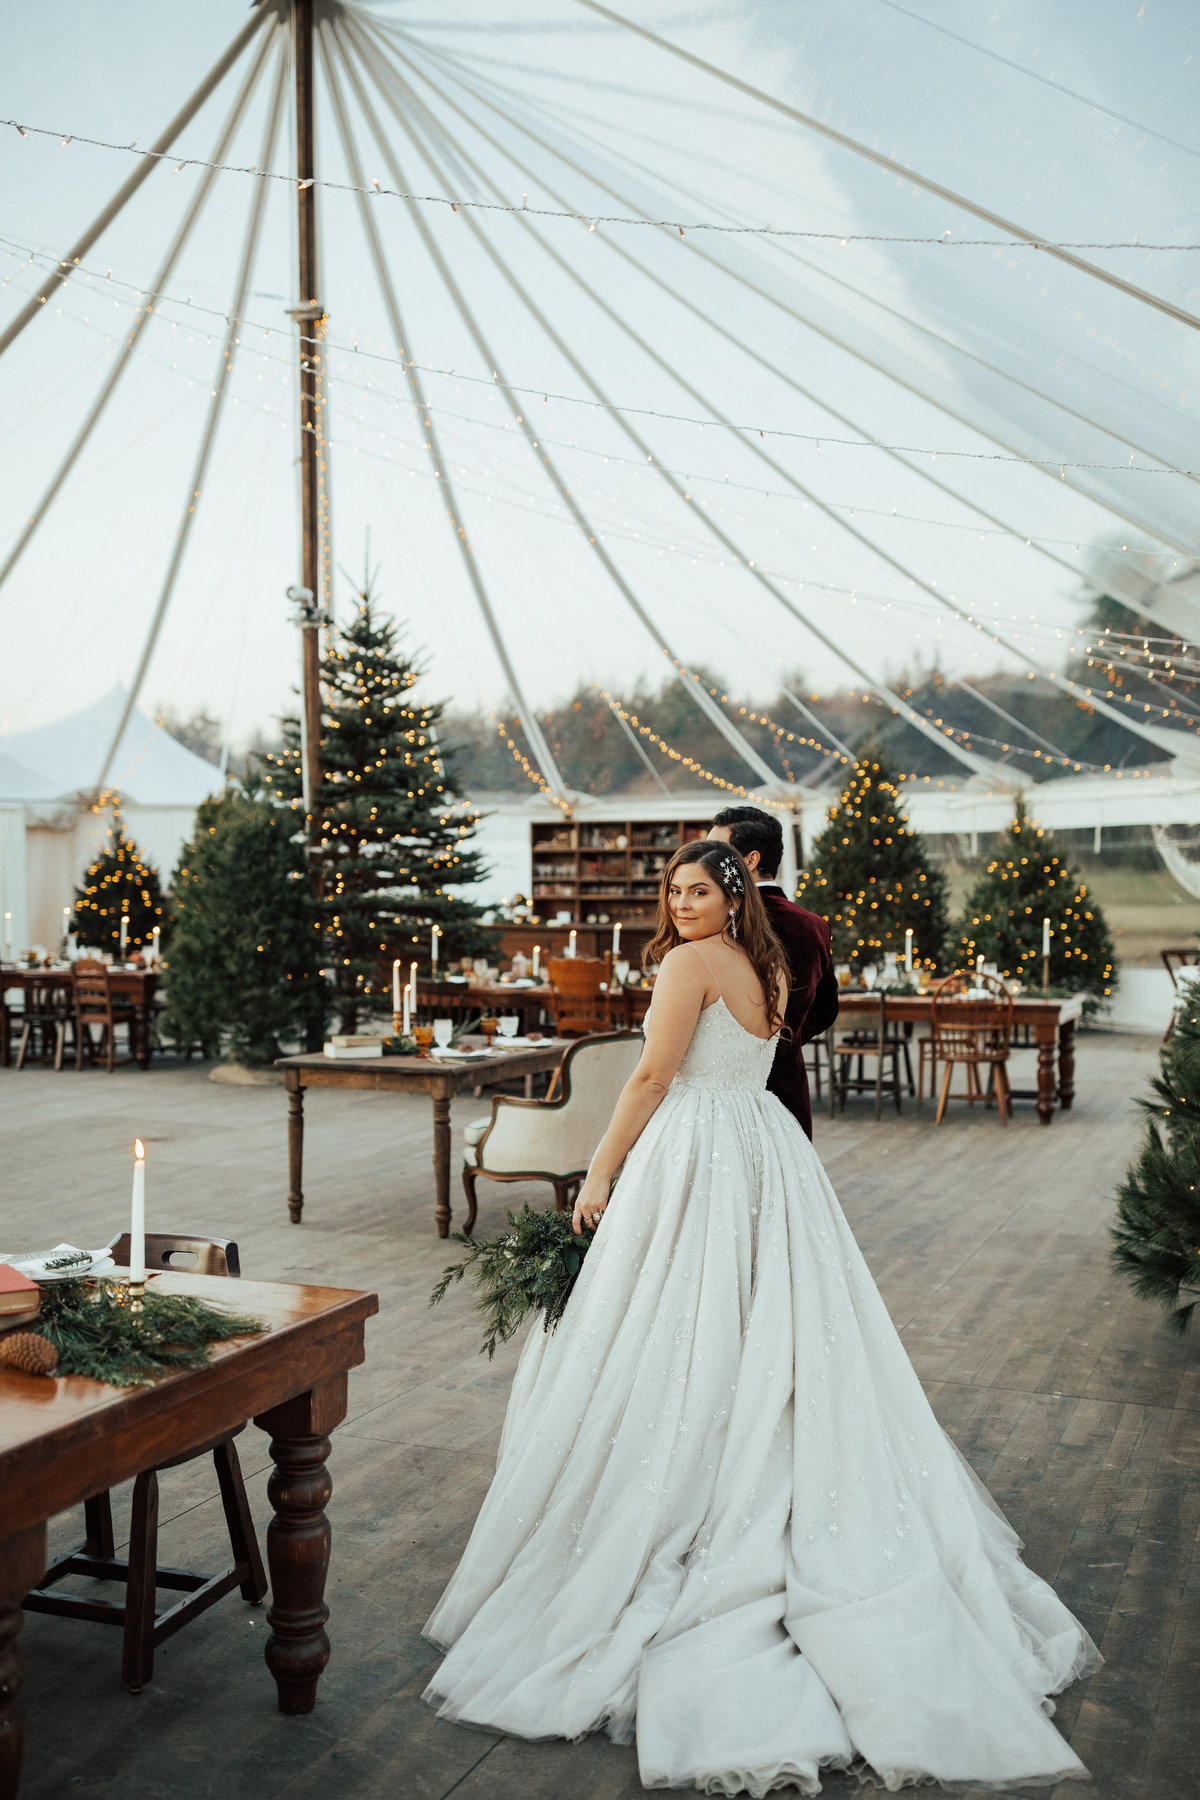 Christy-l-Johnston-Photography-Monica-Relyea-Events-Noelle-Downing-Instagram-Noelle_s-Favorite-Day-Wedding-Battenfelds-Christmas-tree-farm-Red-Hook-New-York-Hudson-Valley-upstate-november-2019-AP1A9247